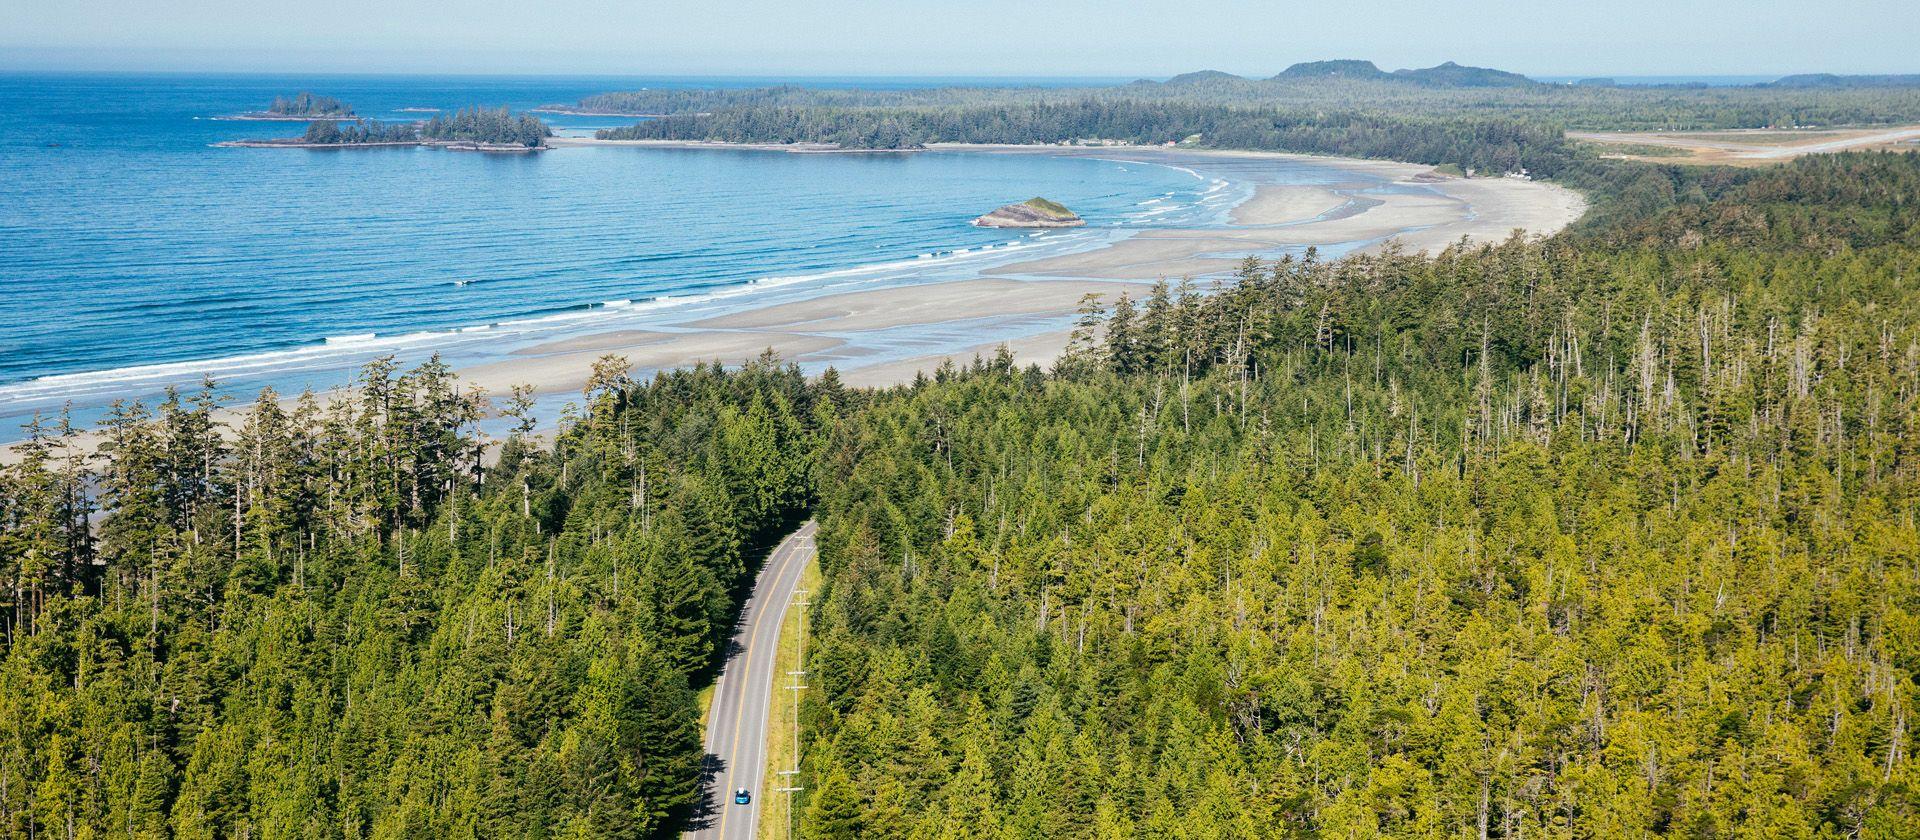 The Real West Coast on Vancouver Island, BC